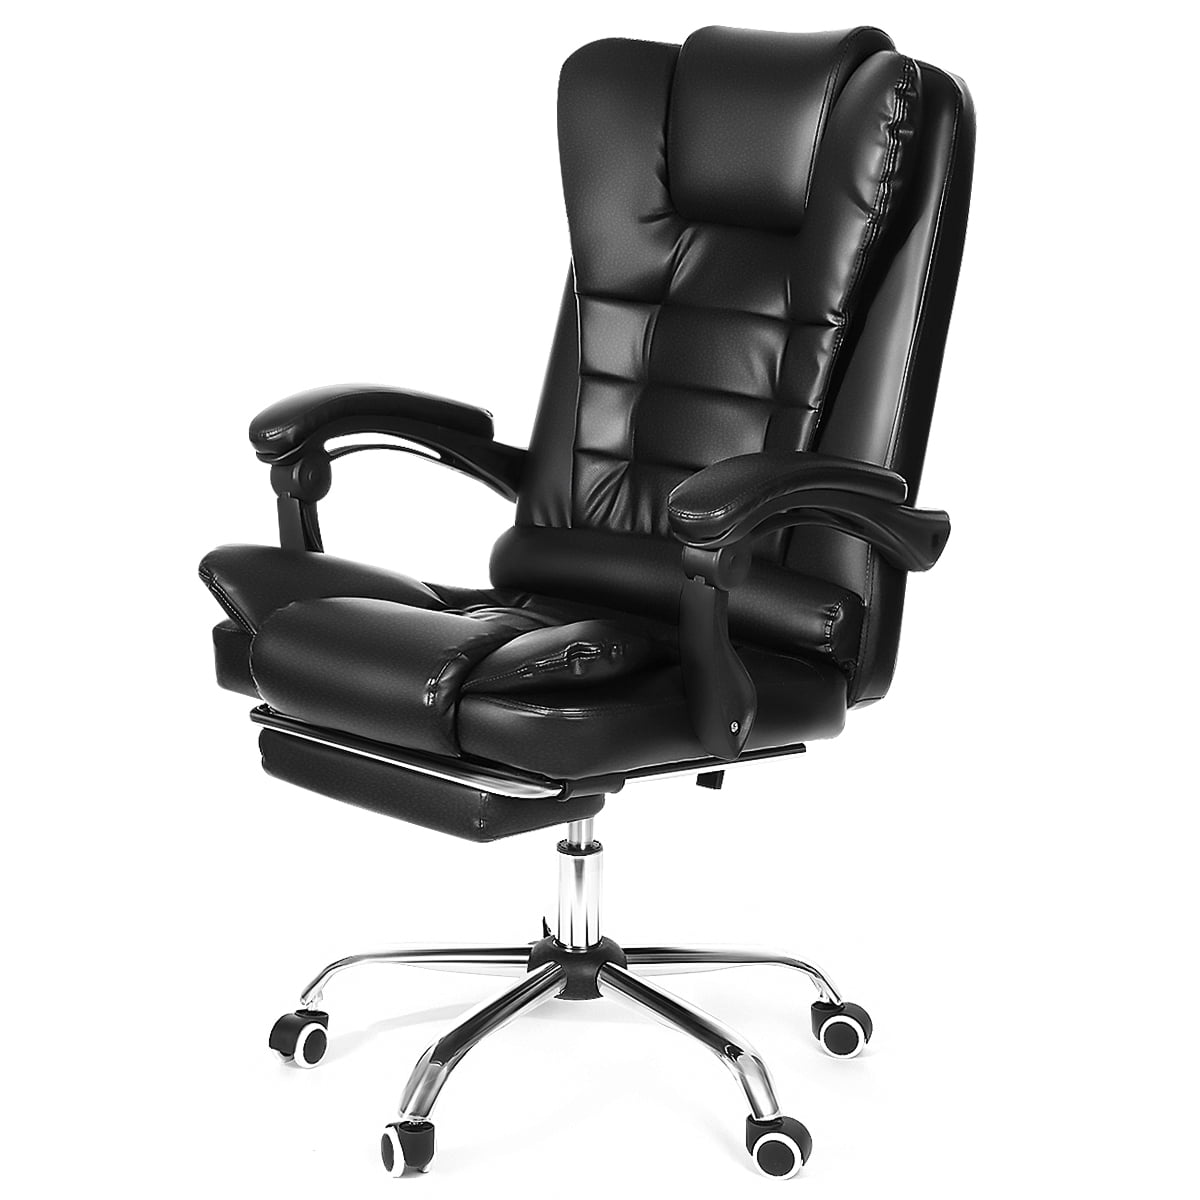 racing style gaming chair  high back reclining office chair ergonomic  soft leather chair with footrest  adjustable armrest  walmart